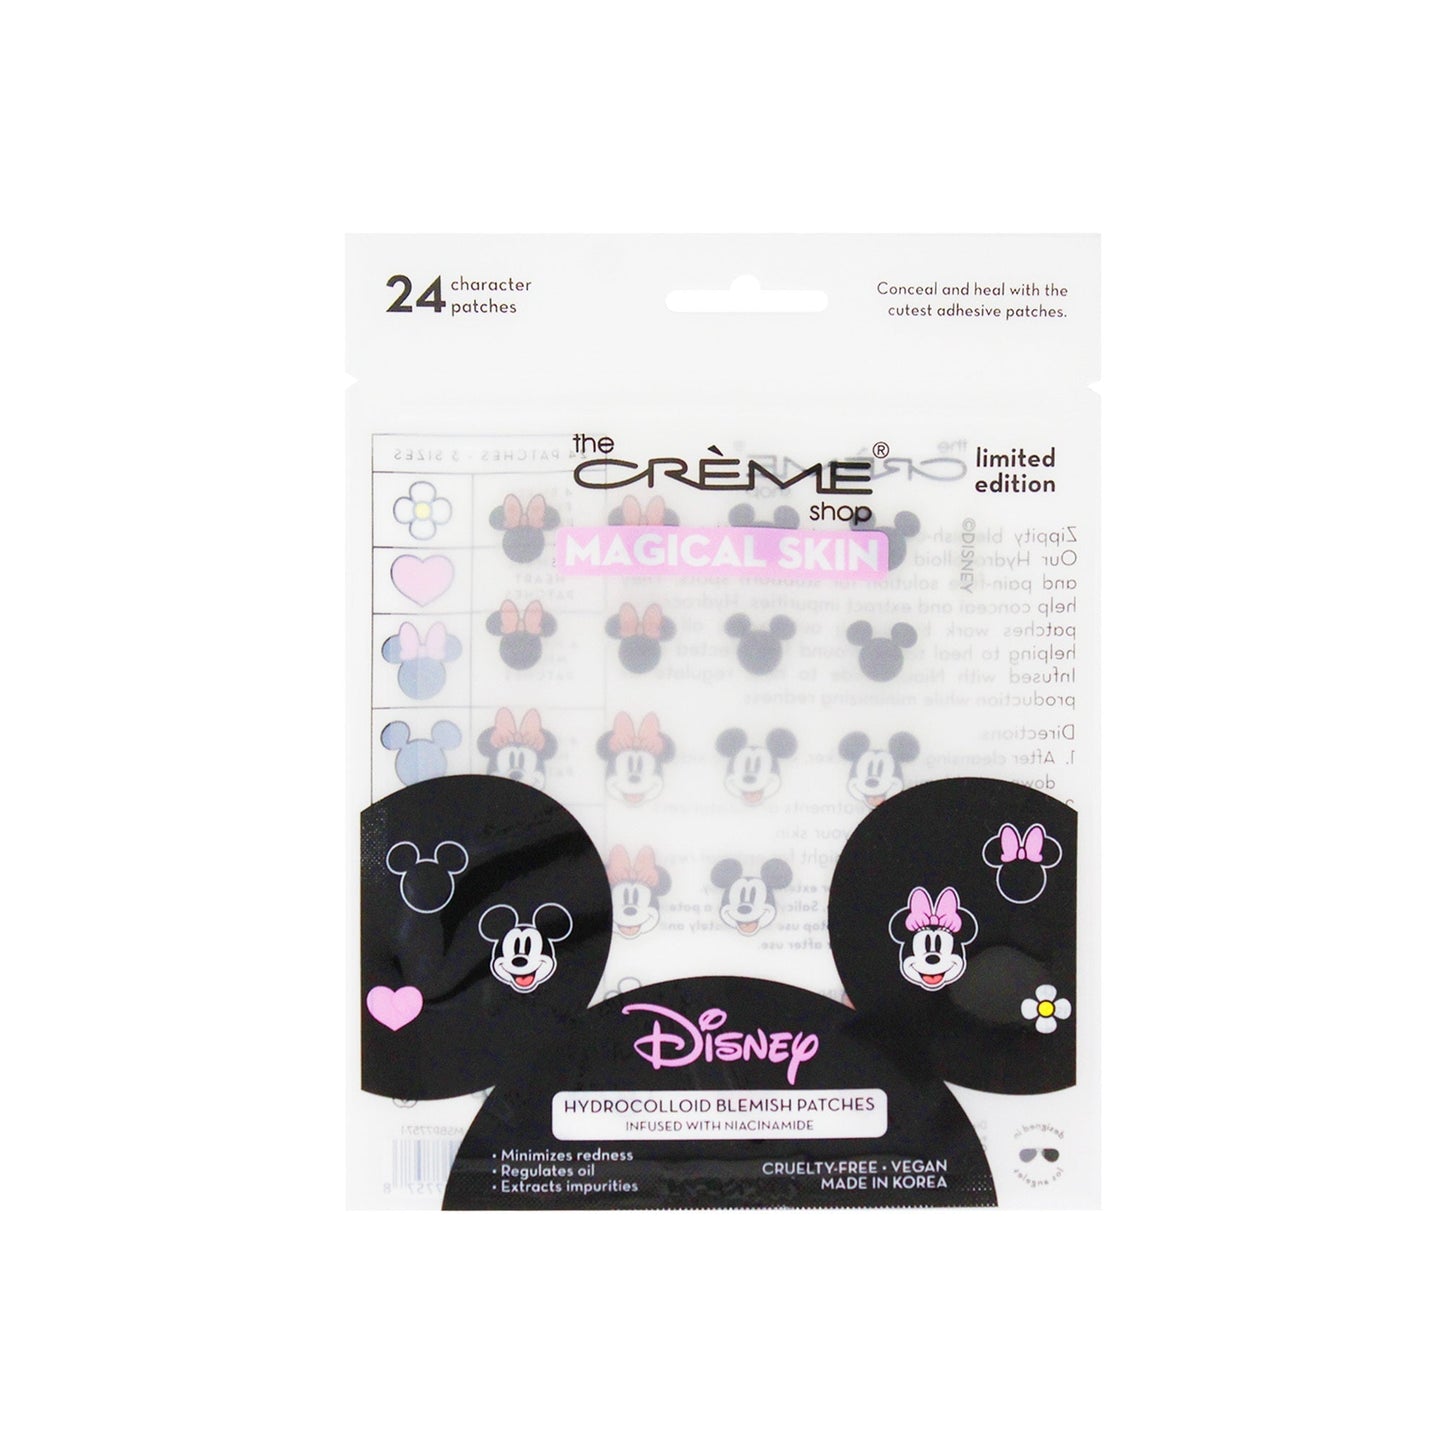 Minnie Mouse Magical Skin Hydrocolloid Blemish Patches Hydrocolloid Acne Patches The Crème Shop x Disney 